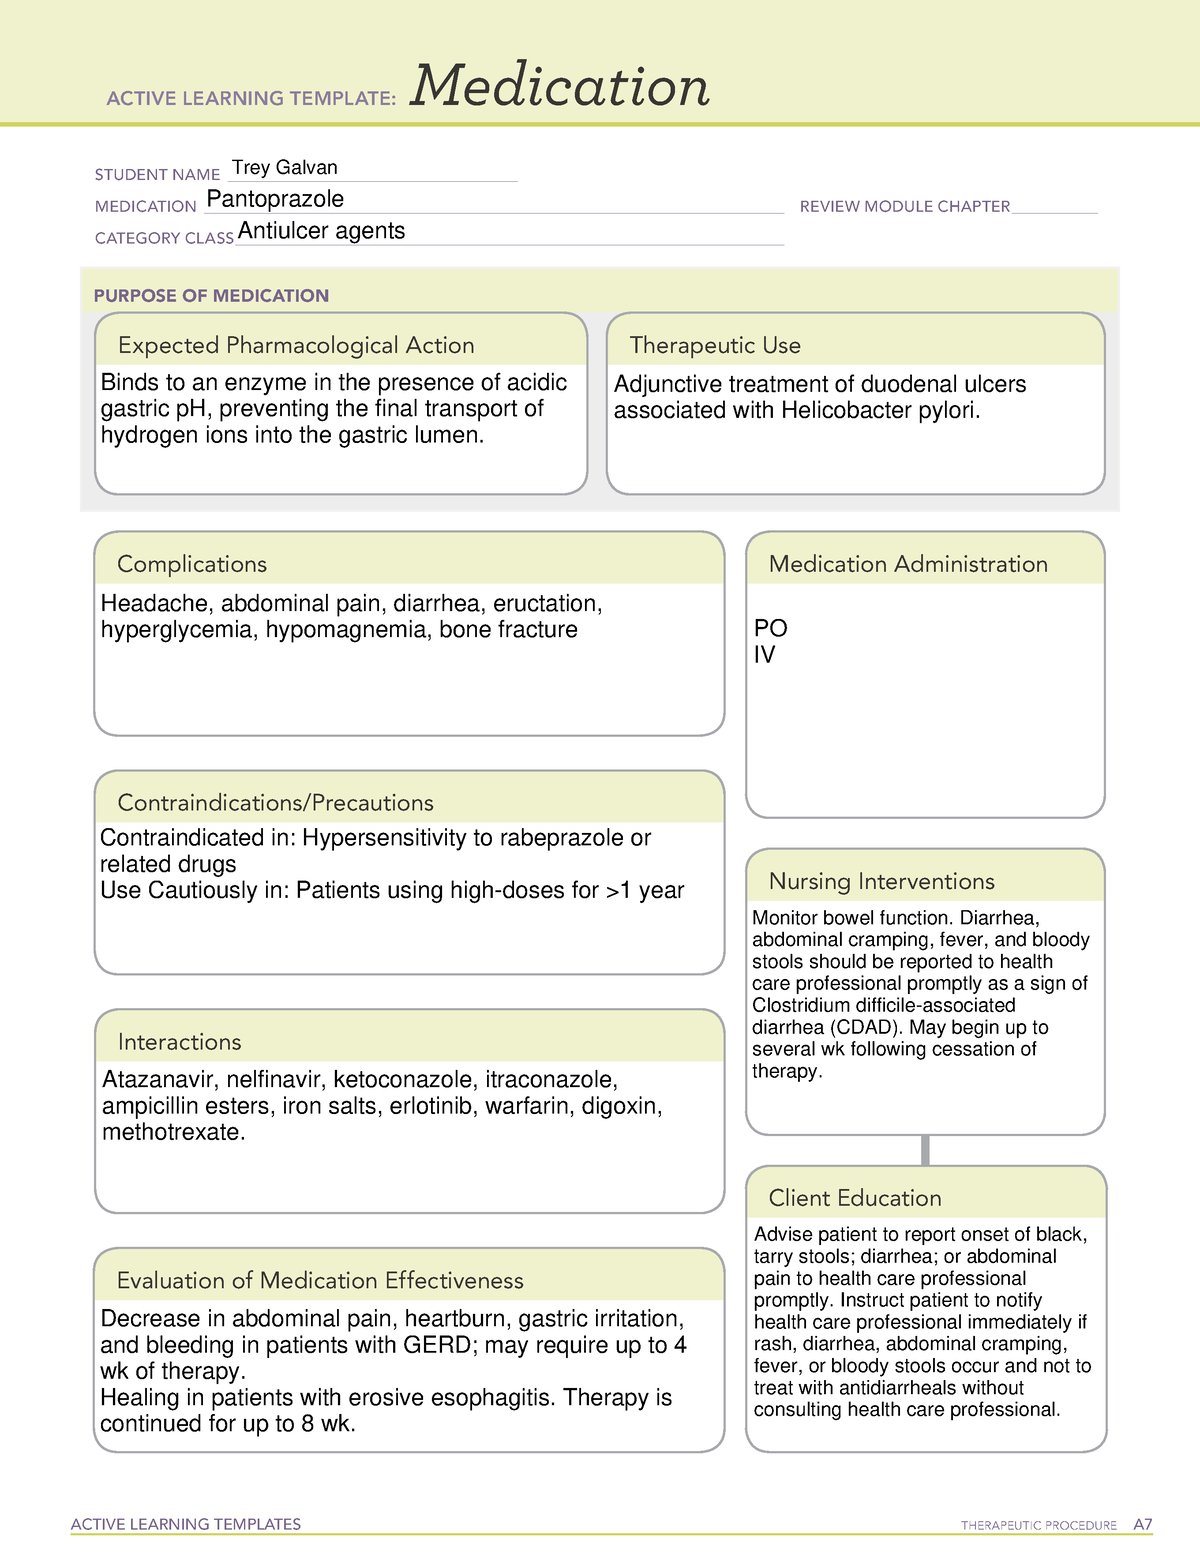 Pantoprazole Medication ACTIVE LEARNING TEMPLATES THERAPEUTIC